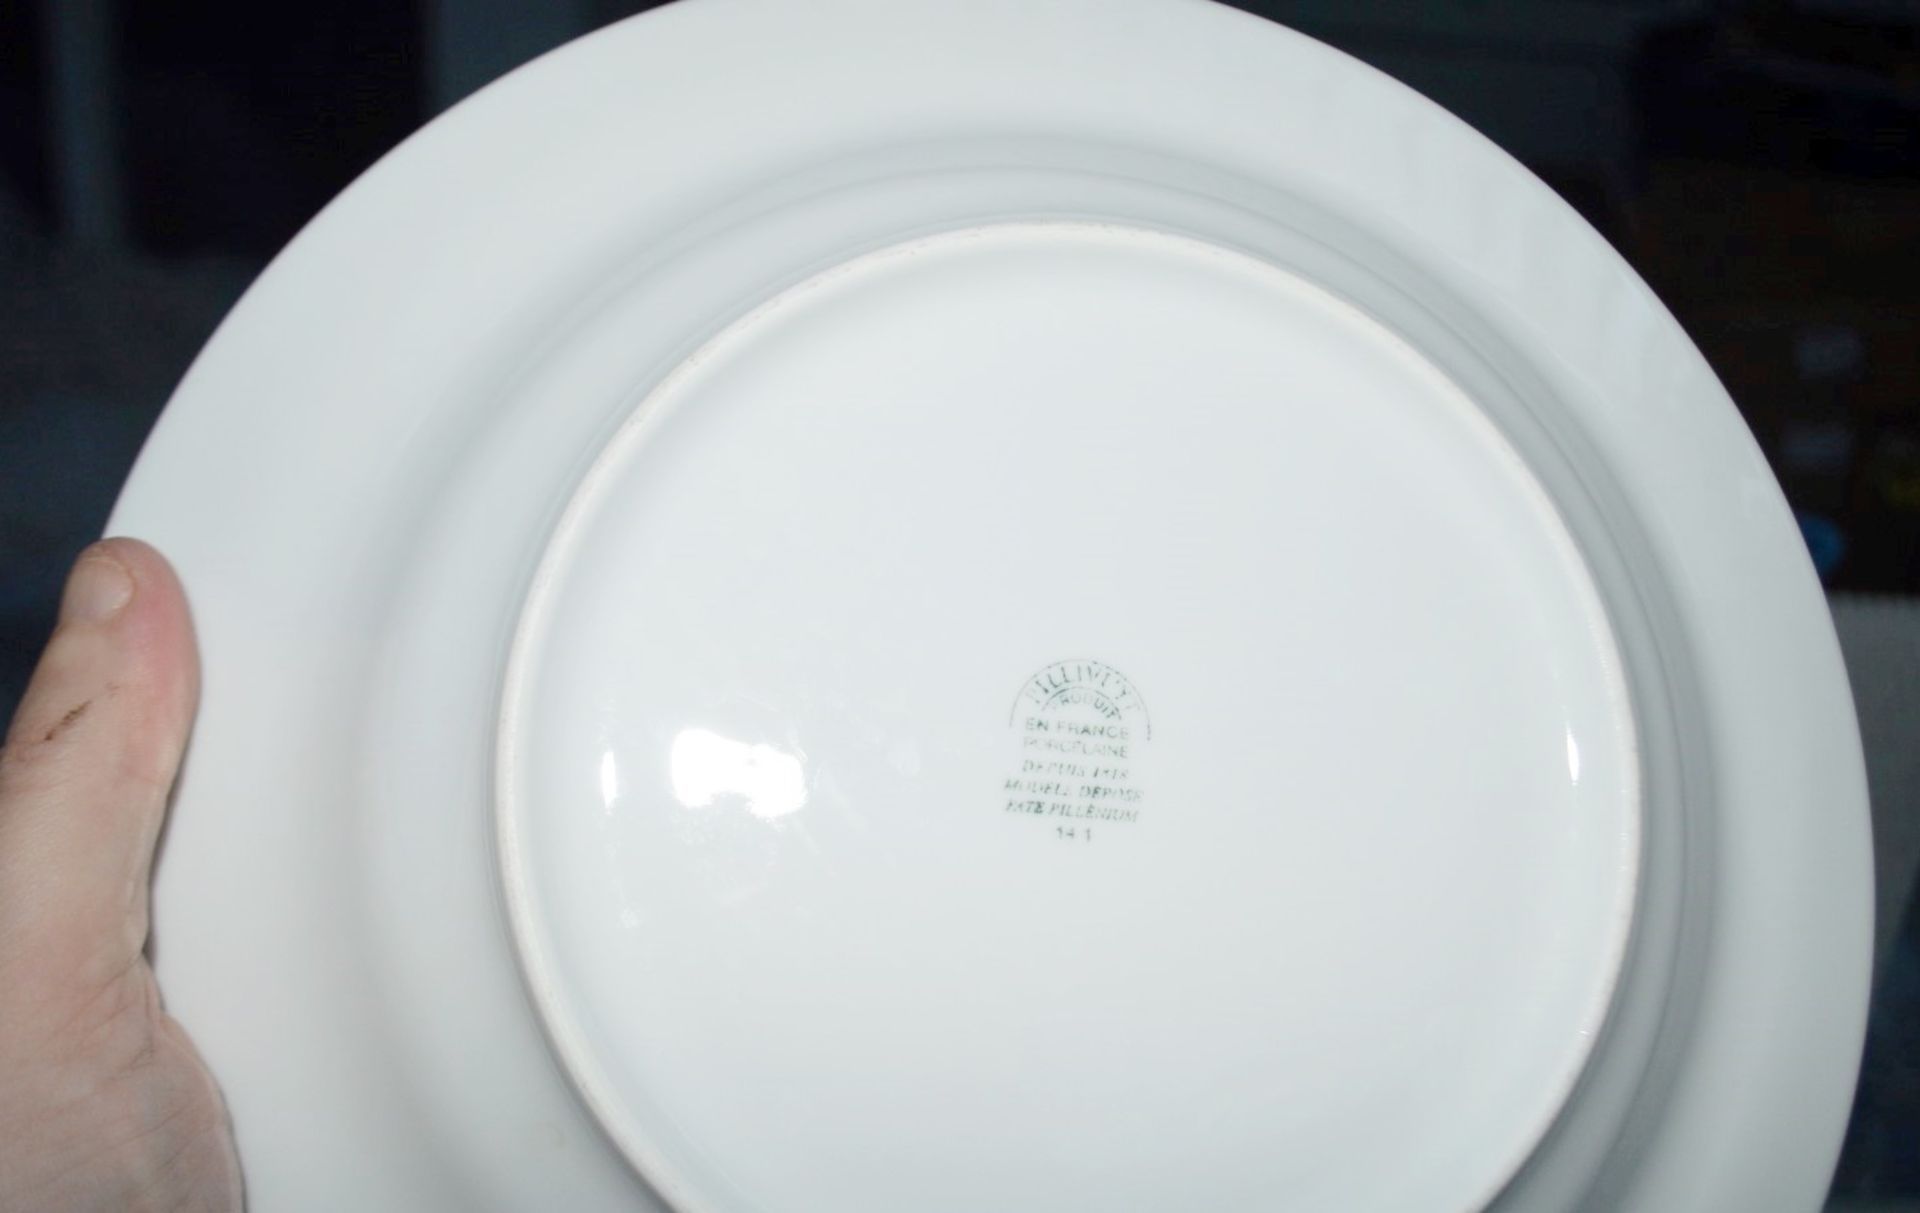 12 x PILLIVUYT Porcelain Pasta / Soup Plates In White Featuring 'Famous Branding' In Gold - Image 5 of 5